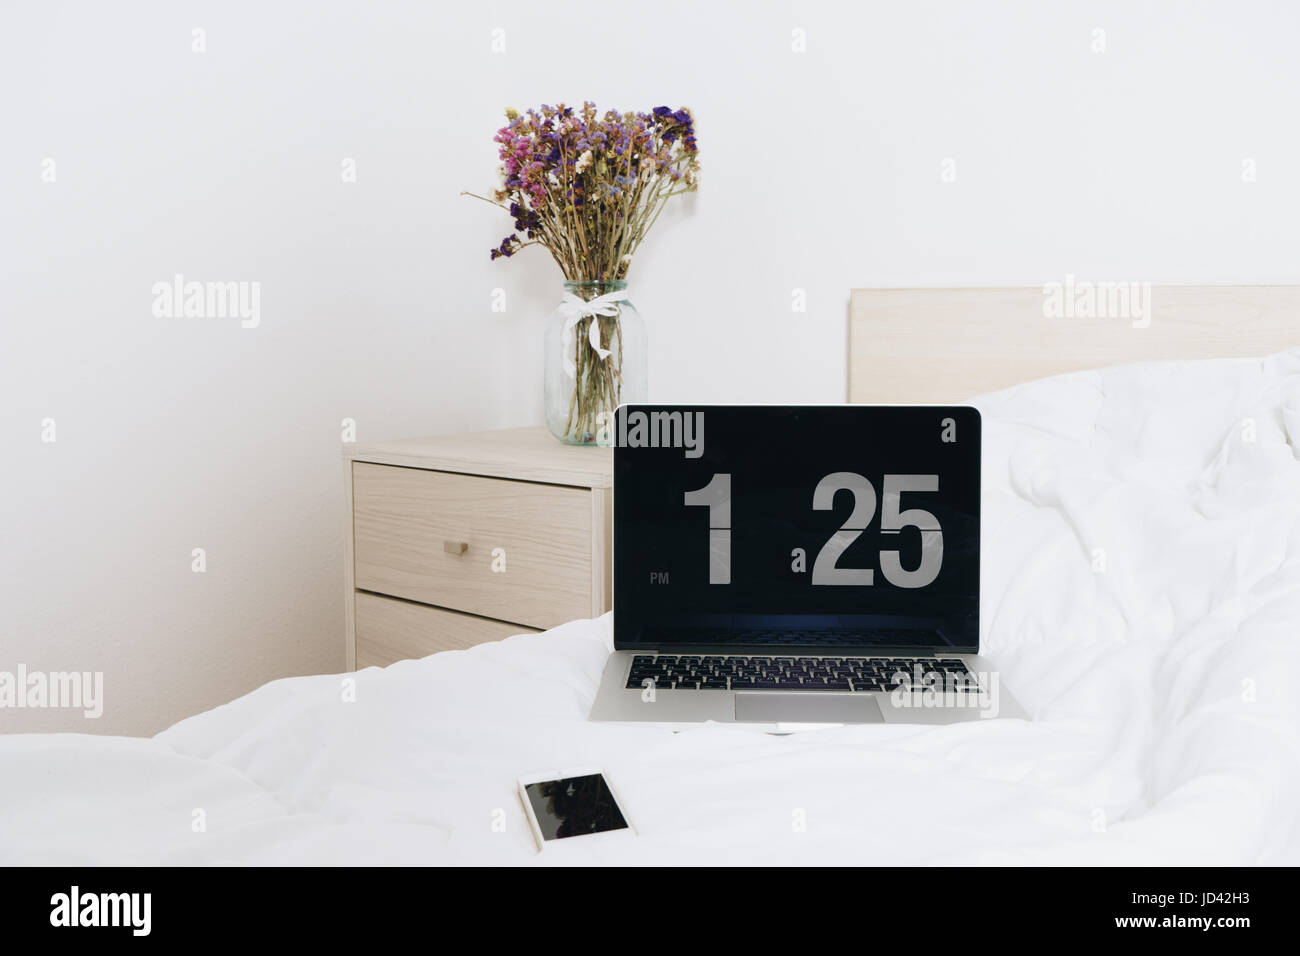 https://c8.alamy.com/comp/JD42H3/flower-on-table-bedside-in-a-light-bedroom-with-lap-top-and-mobile-JD42H3.jpg